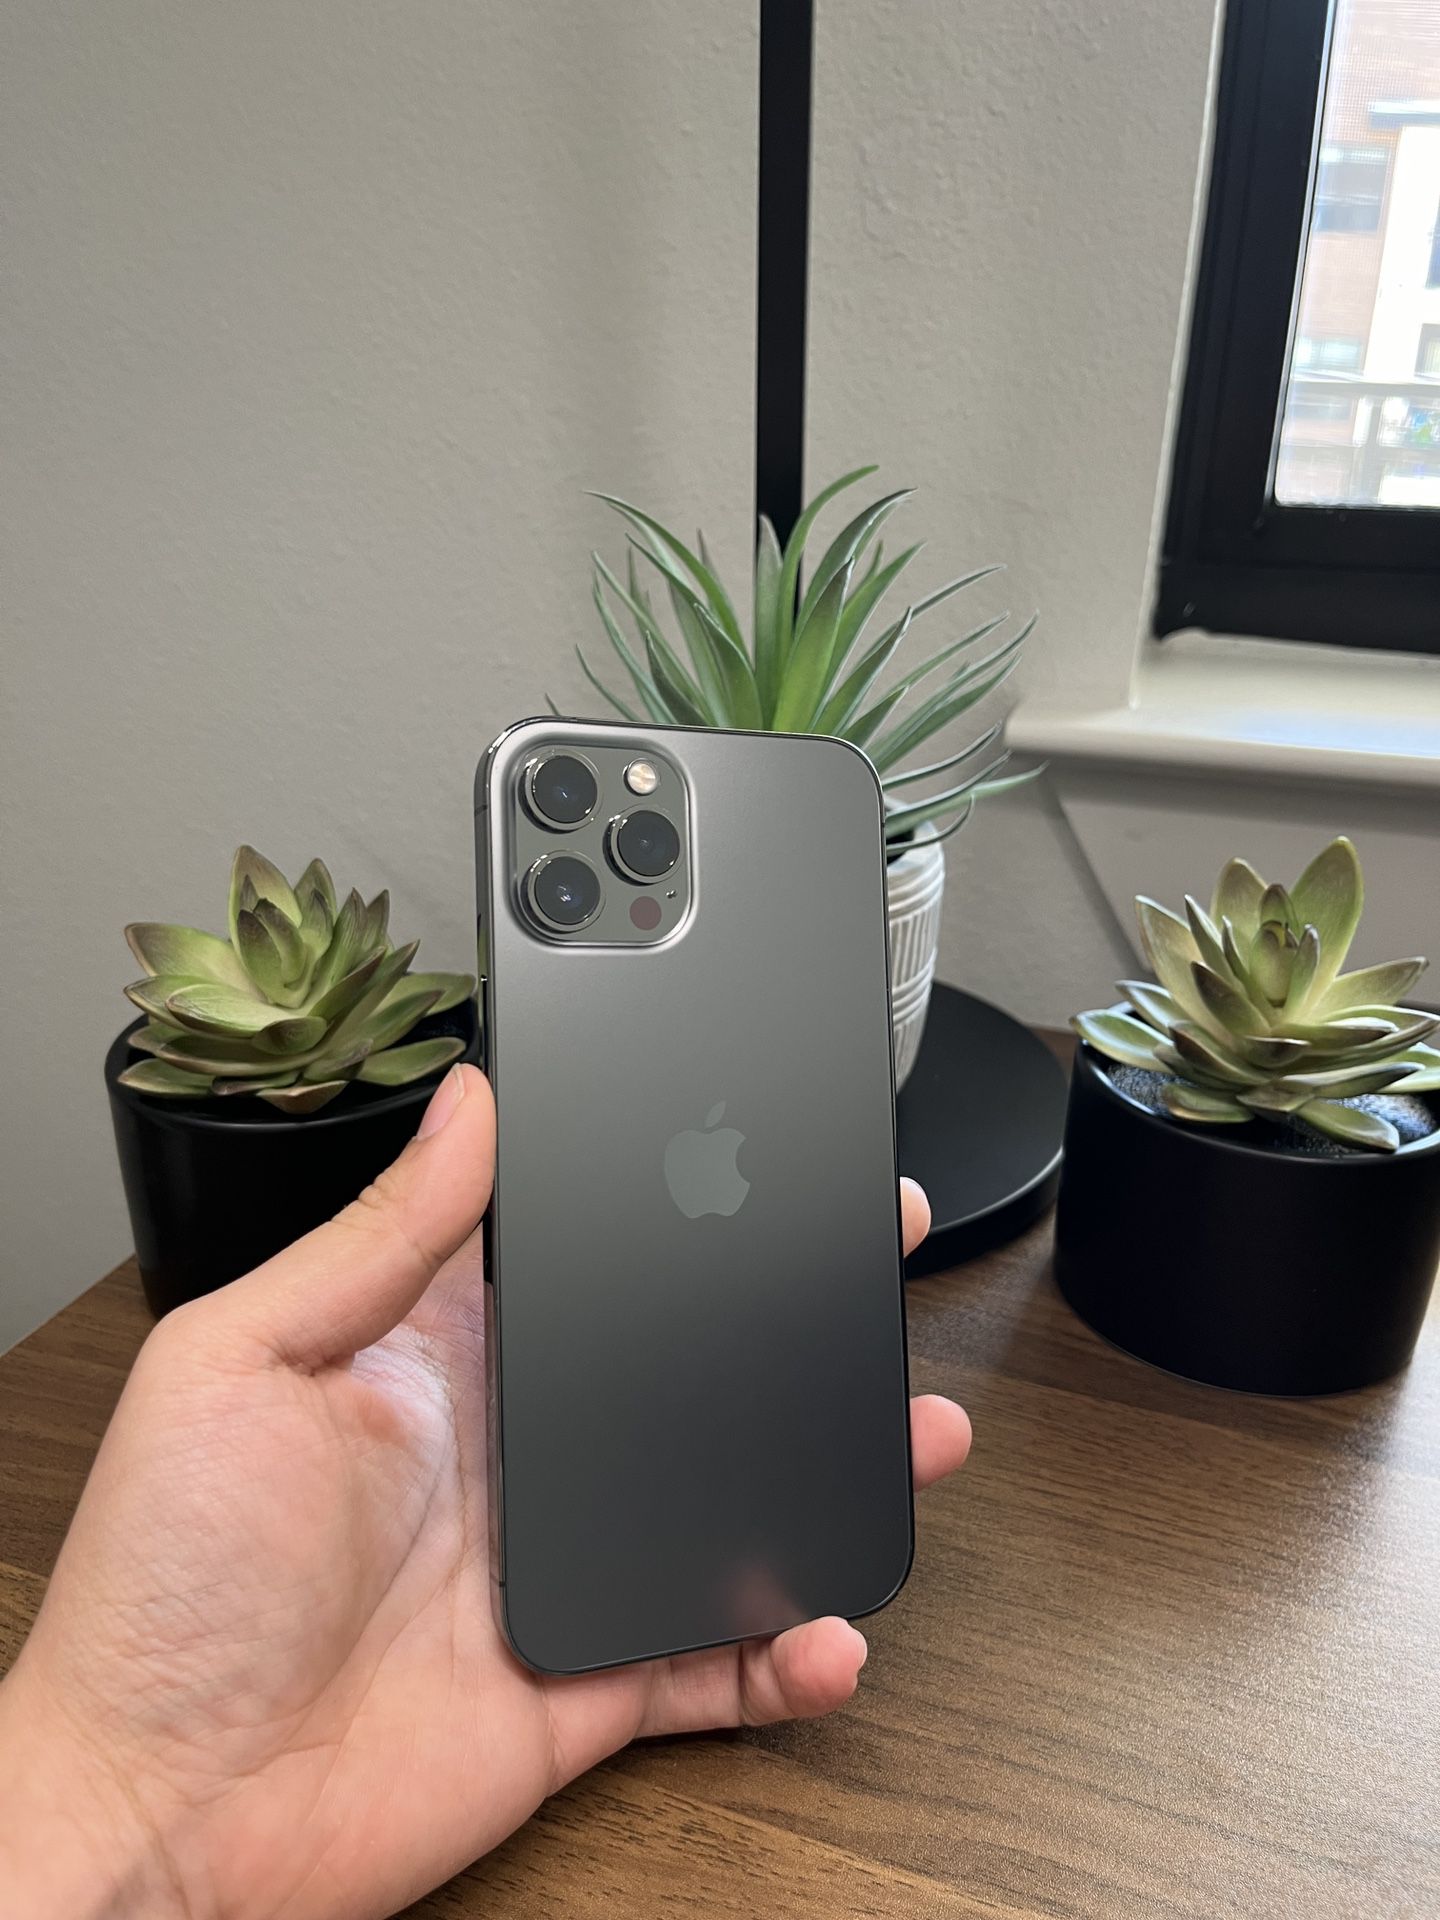 iPhone 12 Pro Max 256gb Graphite 🖤⭐️Unlocked Any Carrier! Verizon AT&T Cricket T-mobile Metro Mexico Tambien 🇲🇽 international